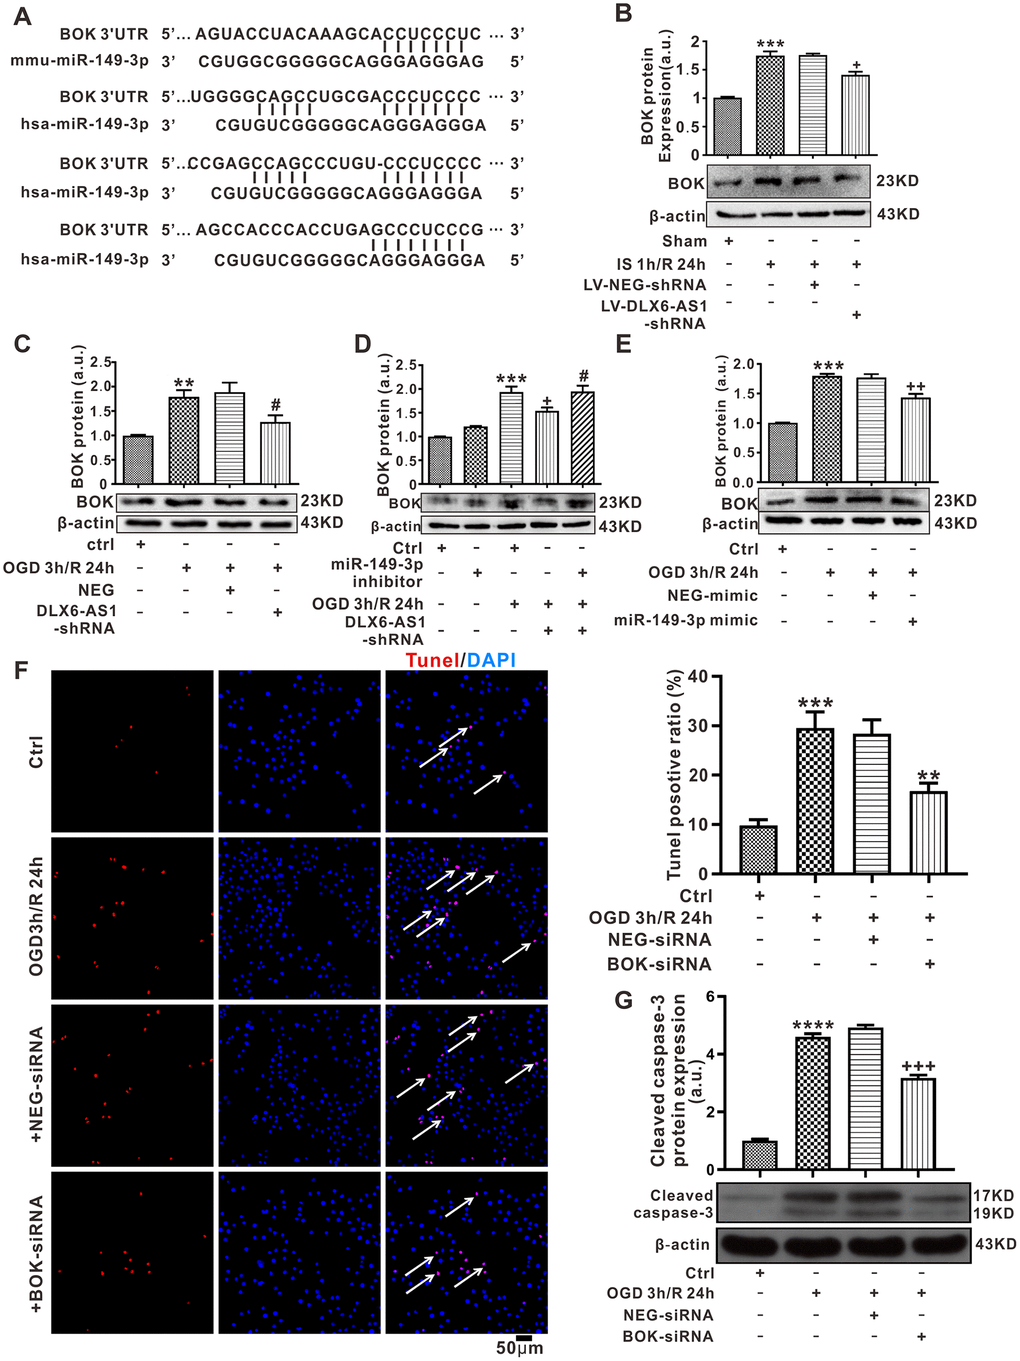 BOK may be a target of miR-149-3p. (A) The predicted binding sites of miR-149-3p and BOK by TargetScanVert. (B) BOK expression in the brain I/R model treated by LV-DLX6-AS1. (C–E) BOK protein expression following treatment with a DLX6-AS1 shRNA, miR-149-3p mimic or miR-149-3p inhibitor in N2a cells. (F) Representative images and statistics of TUNEL staining of N2a cells used to confirm apoptotic changes (100X). (G) Cleaved caspase-3 protein levels measured by western blotting. Values represent mean ± SEM (n = 3 in each group). **P +P ++P +++P #P 